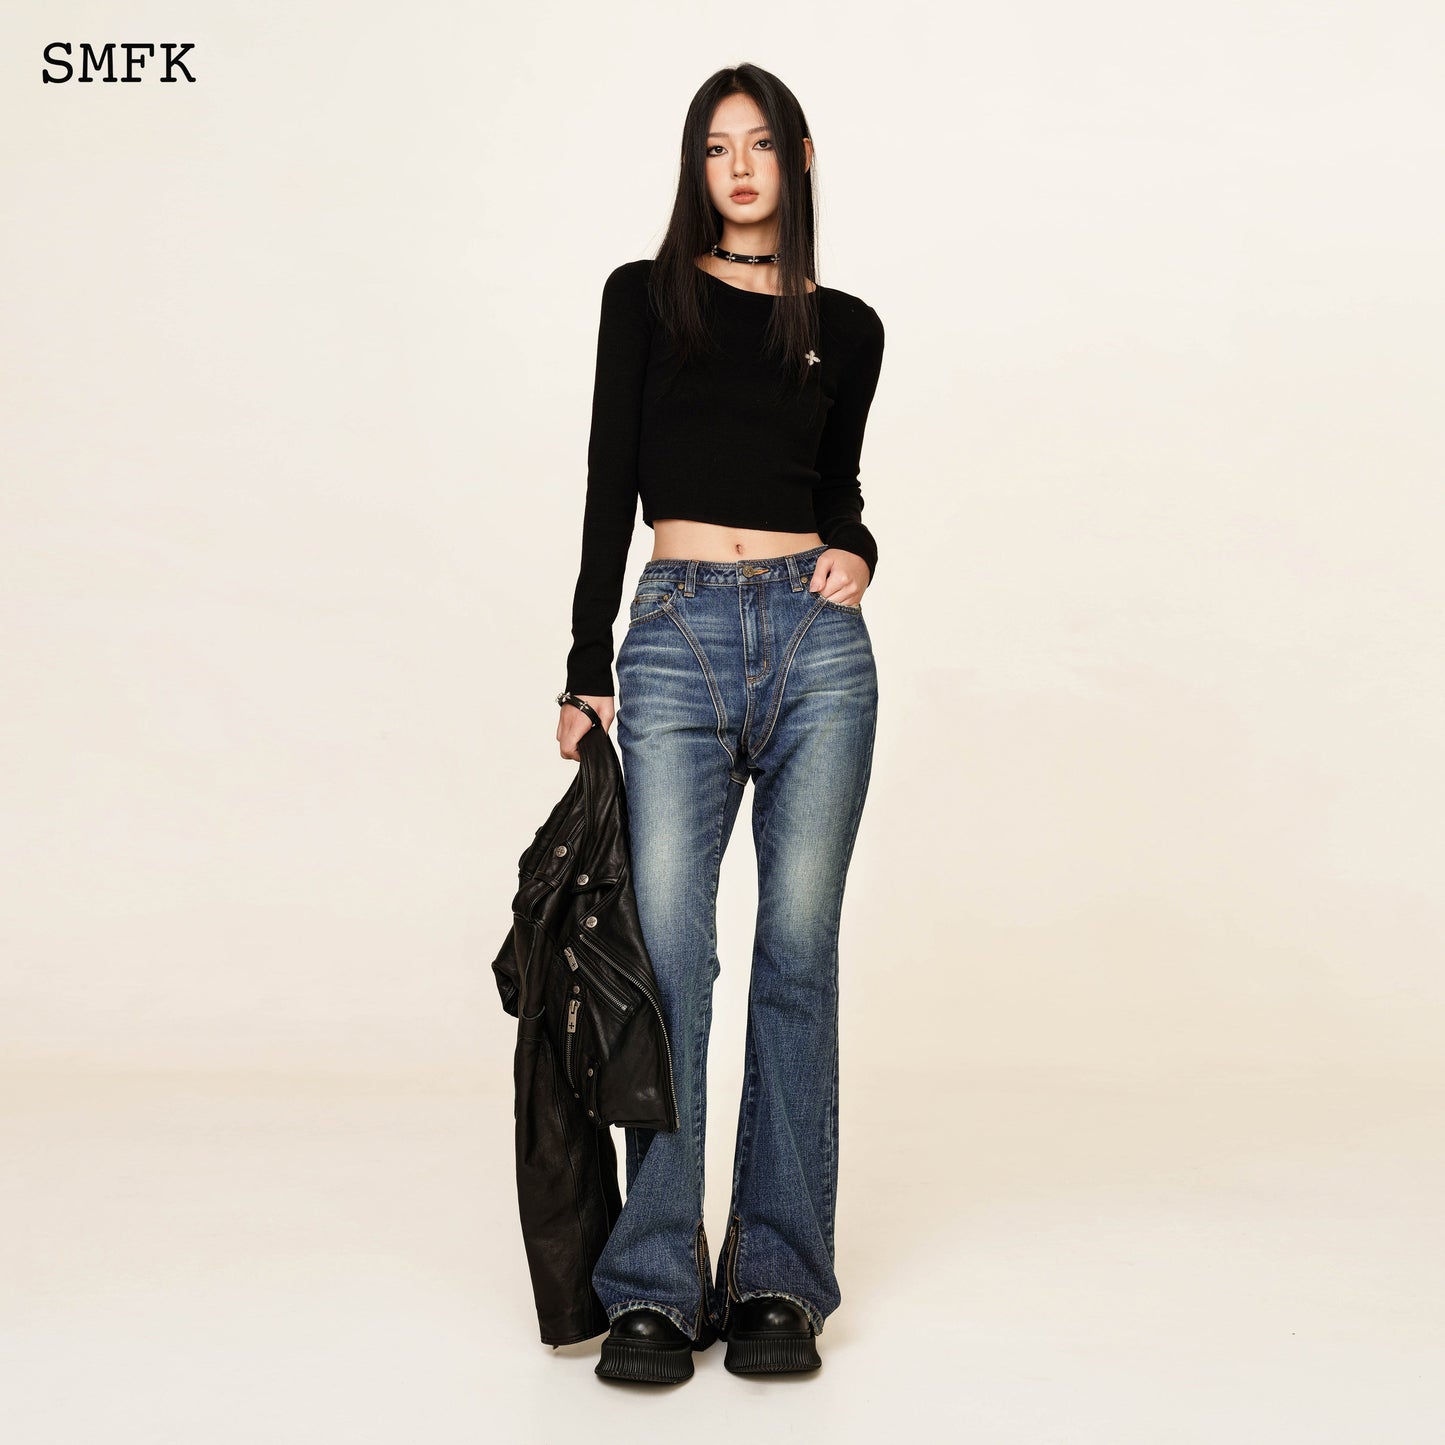 SMFK Compass Cross Classic Riding Knitted Top In Black